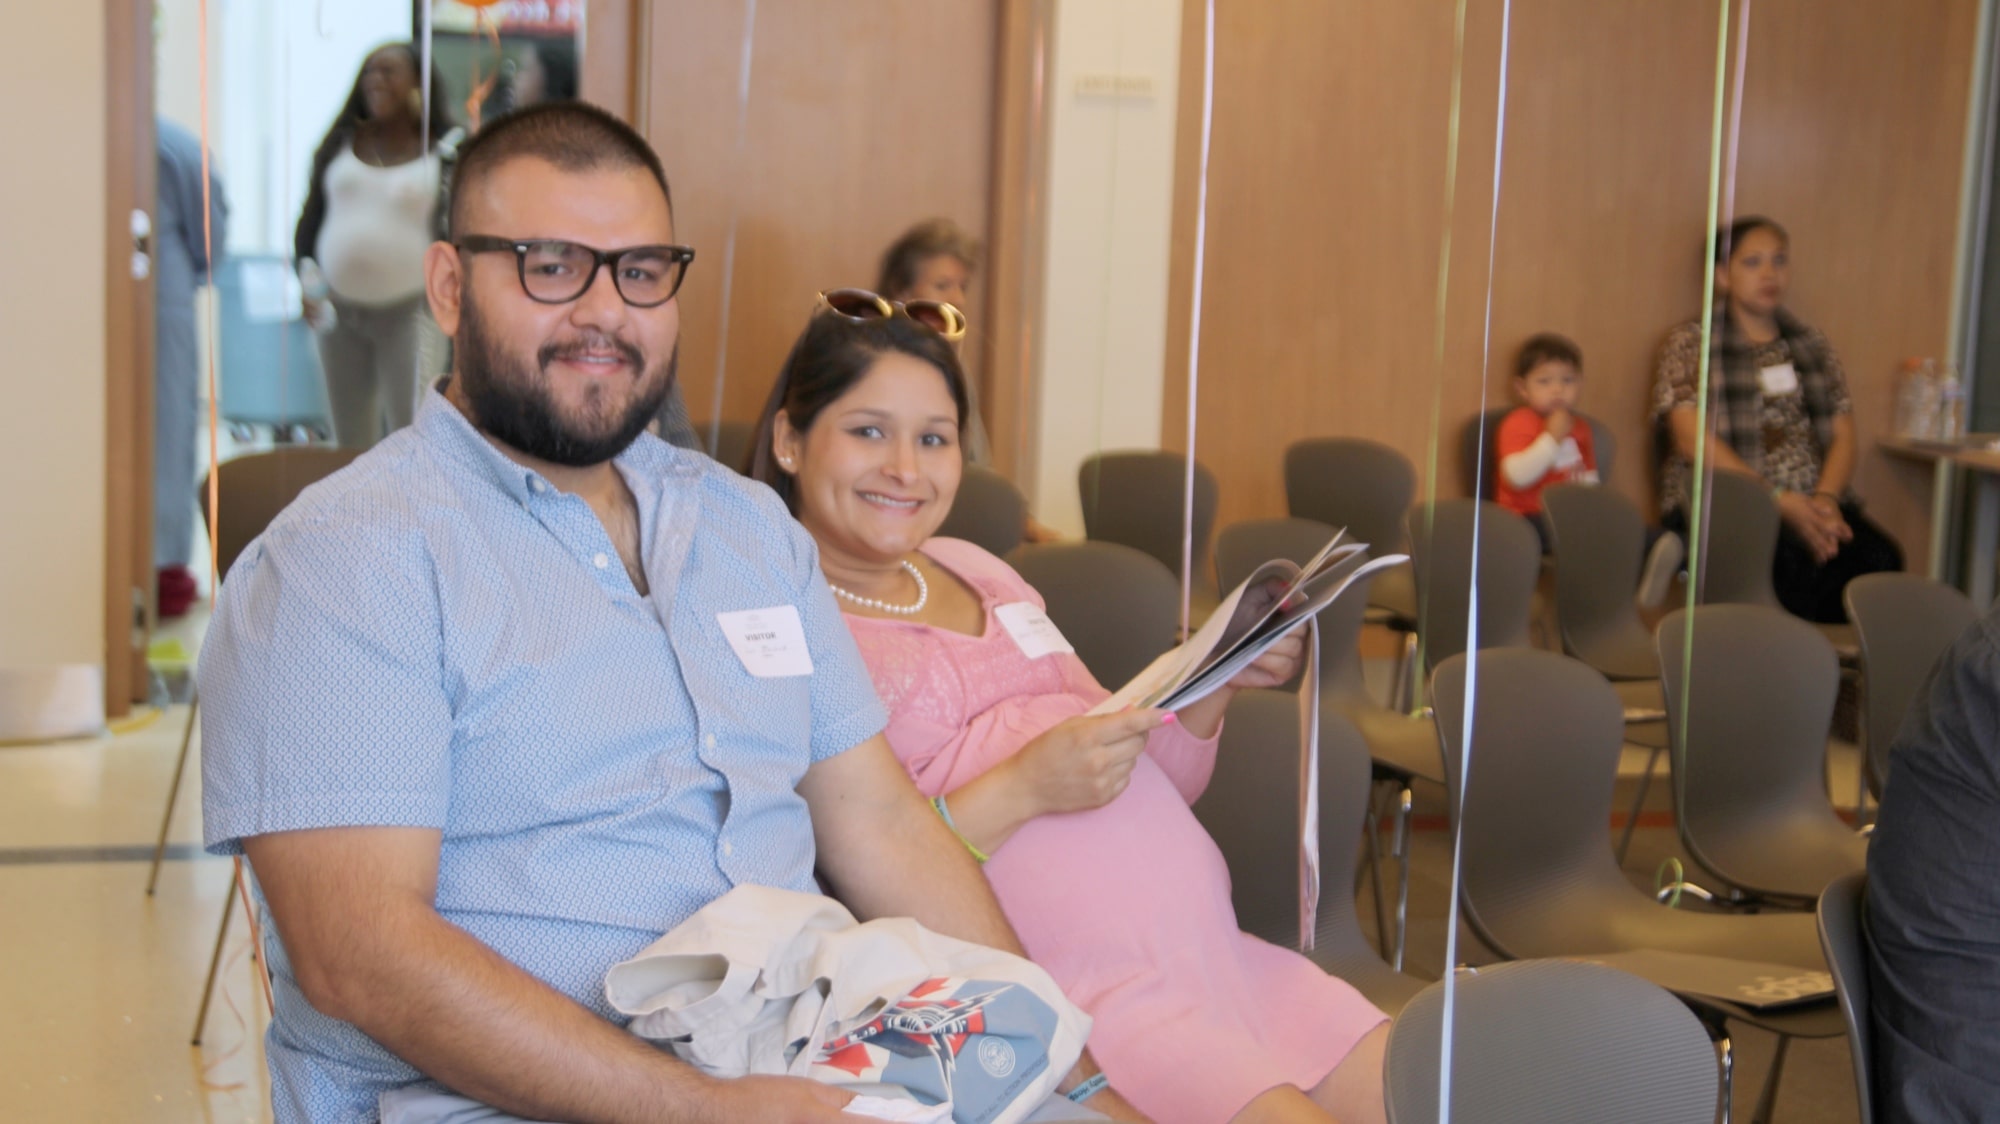 Smiling Latinx couple at maternity event